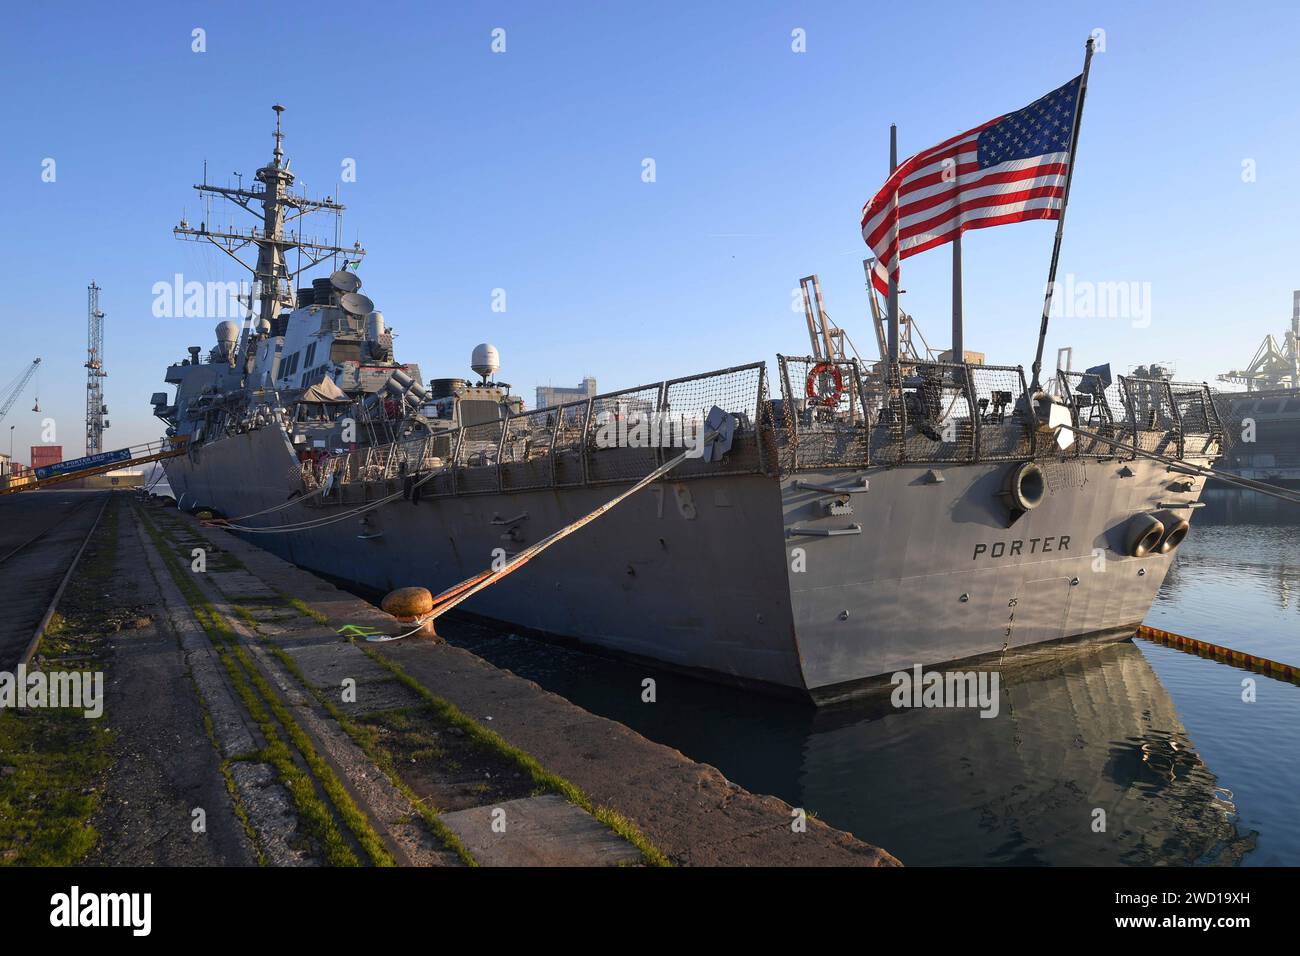 The guided missile destroyer USS Porter sits pierside in Venice, Italy. Stock Photo